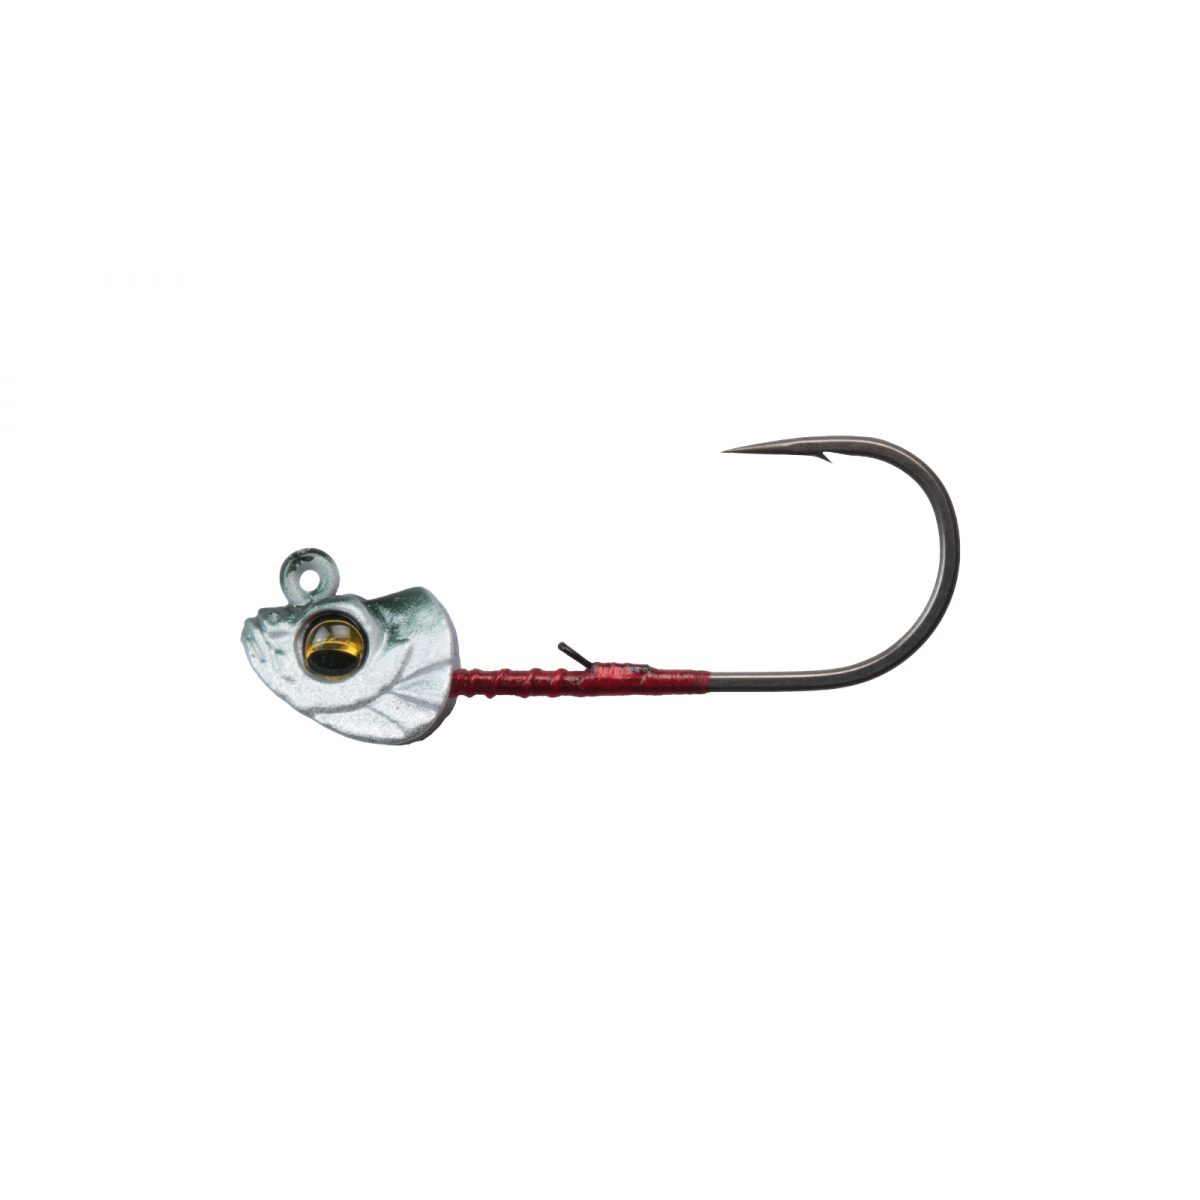 Eagle Claw 413 Jig Hooks - 60 degree bend by Fishing Weight Moulds